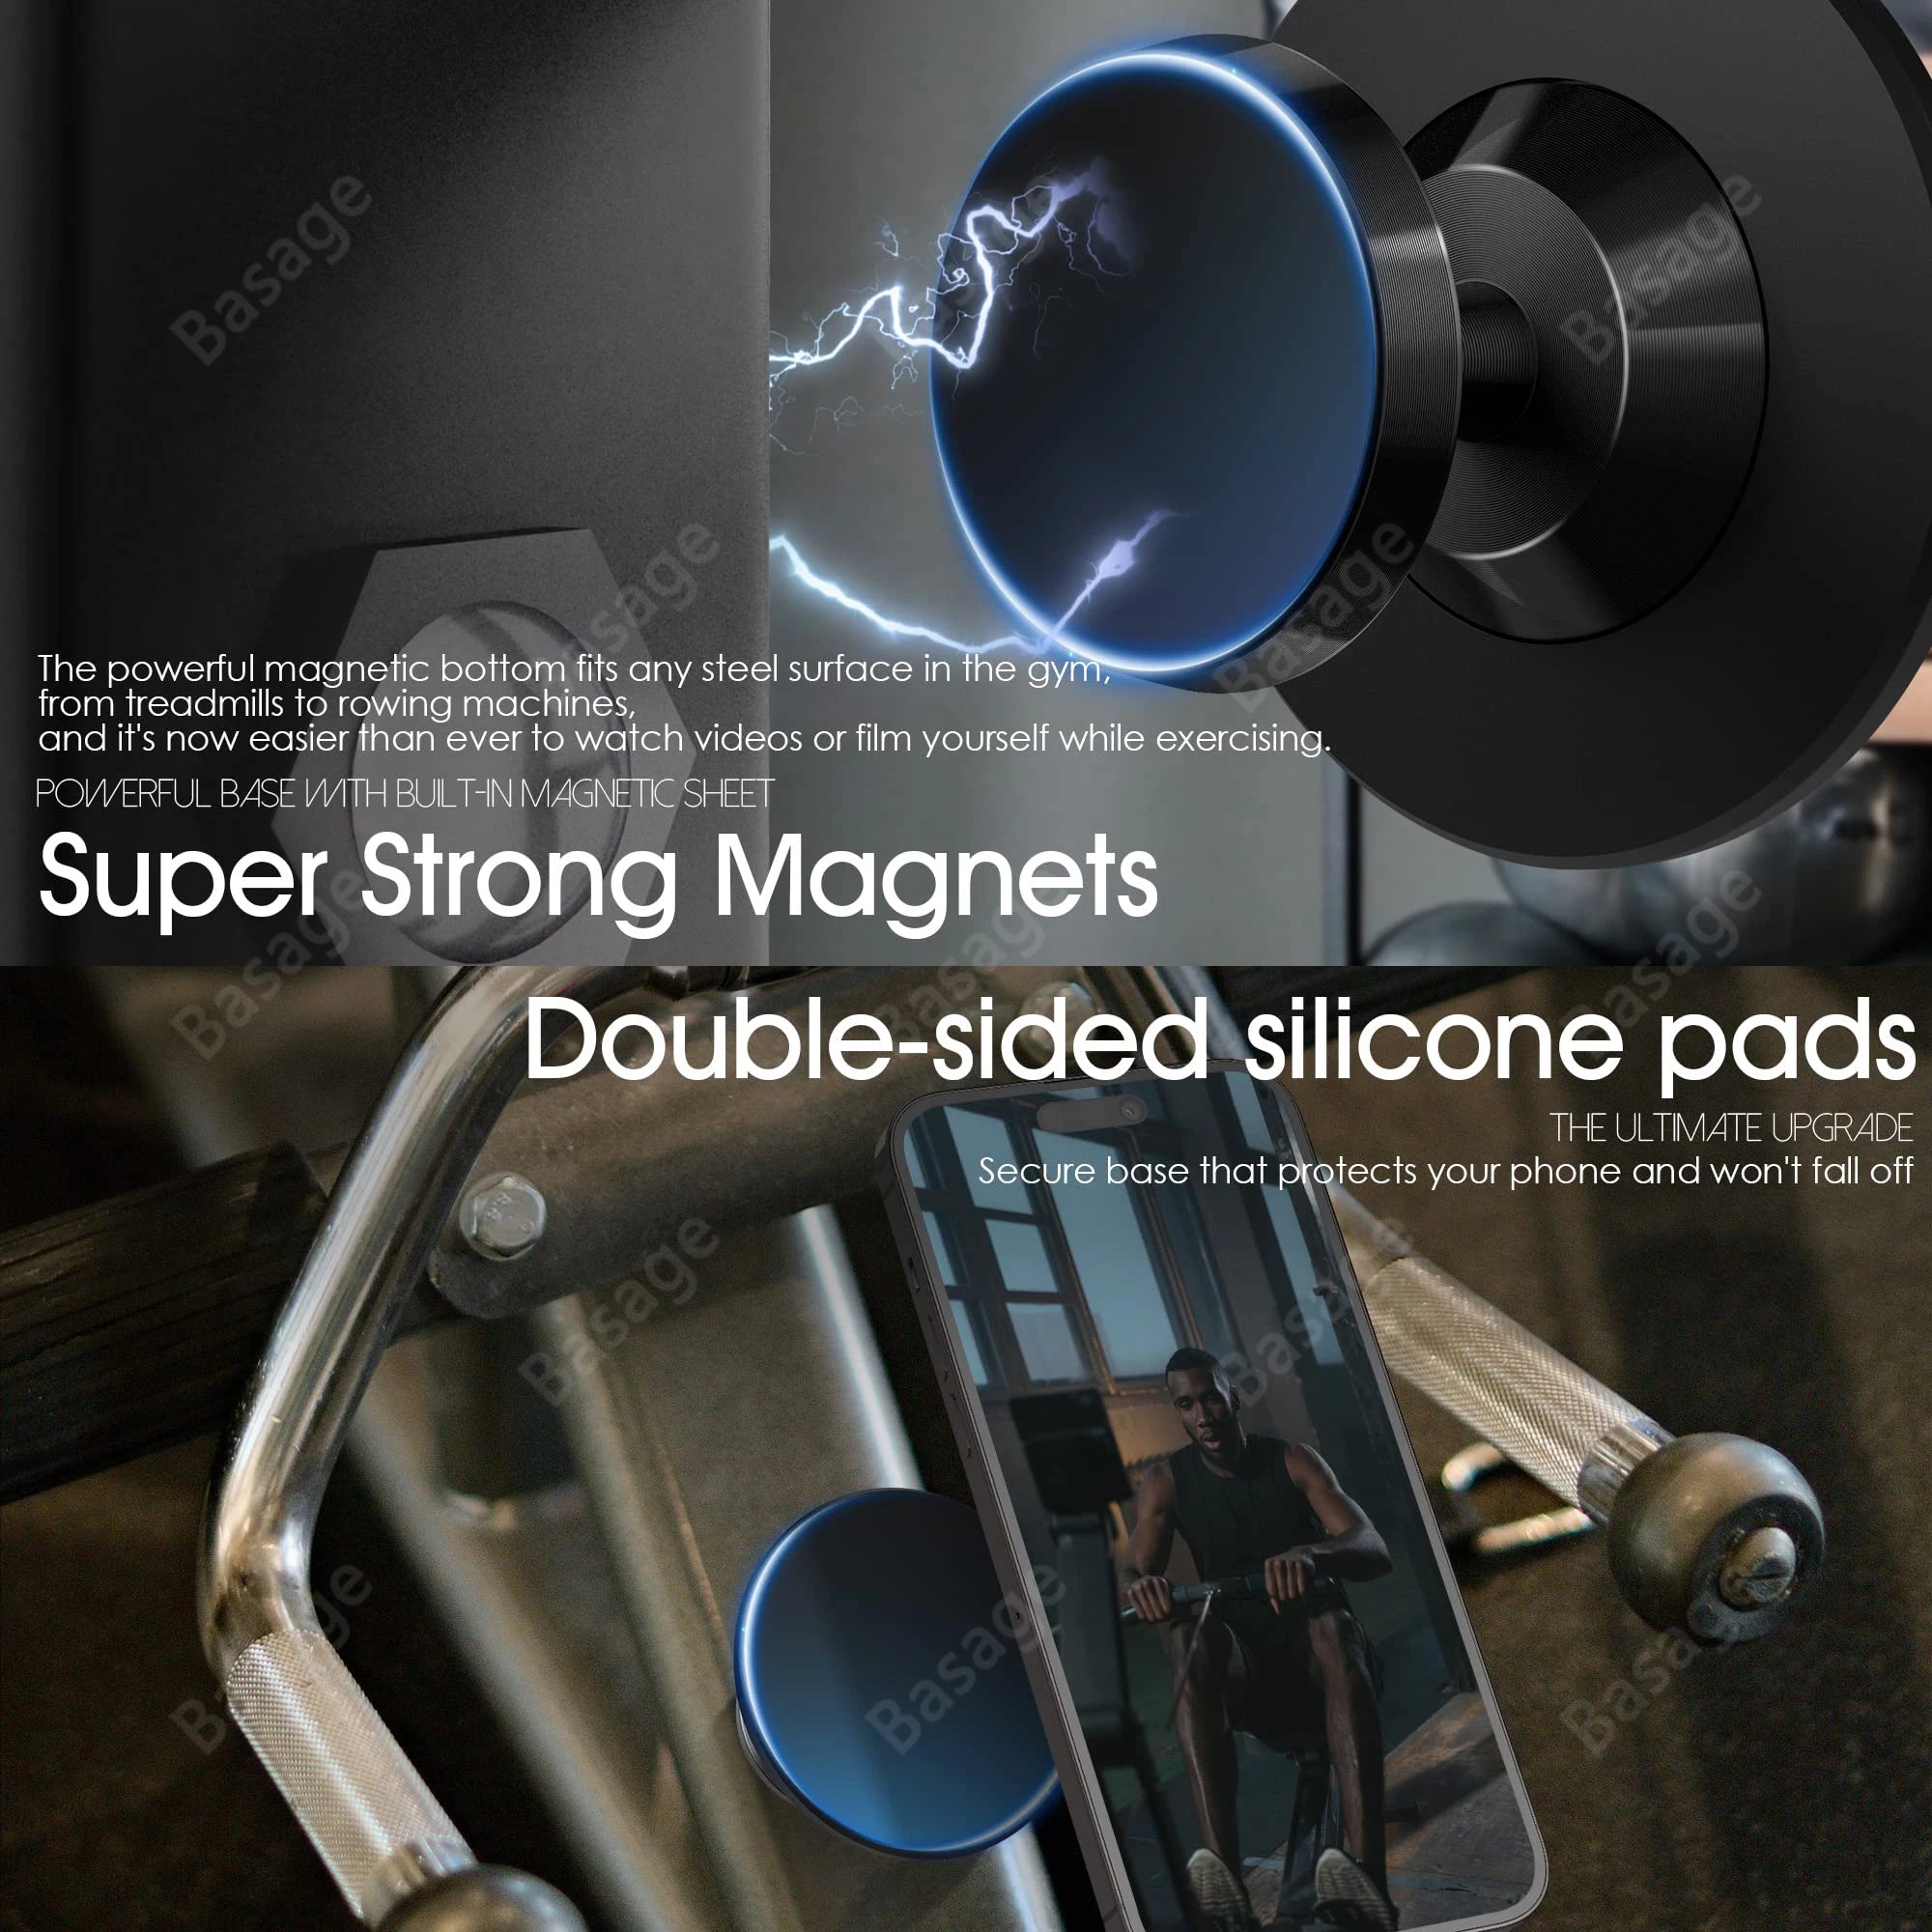 Gym Mate Magnetic Phone Mount &Double-sided Magnetic Suction Phone Holder for MagSafe. Shoot Hands-Free Videos While Working Out